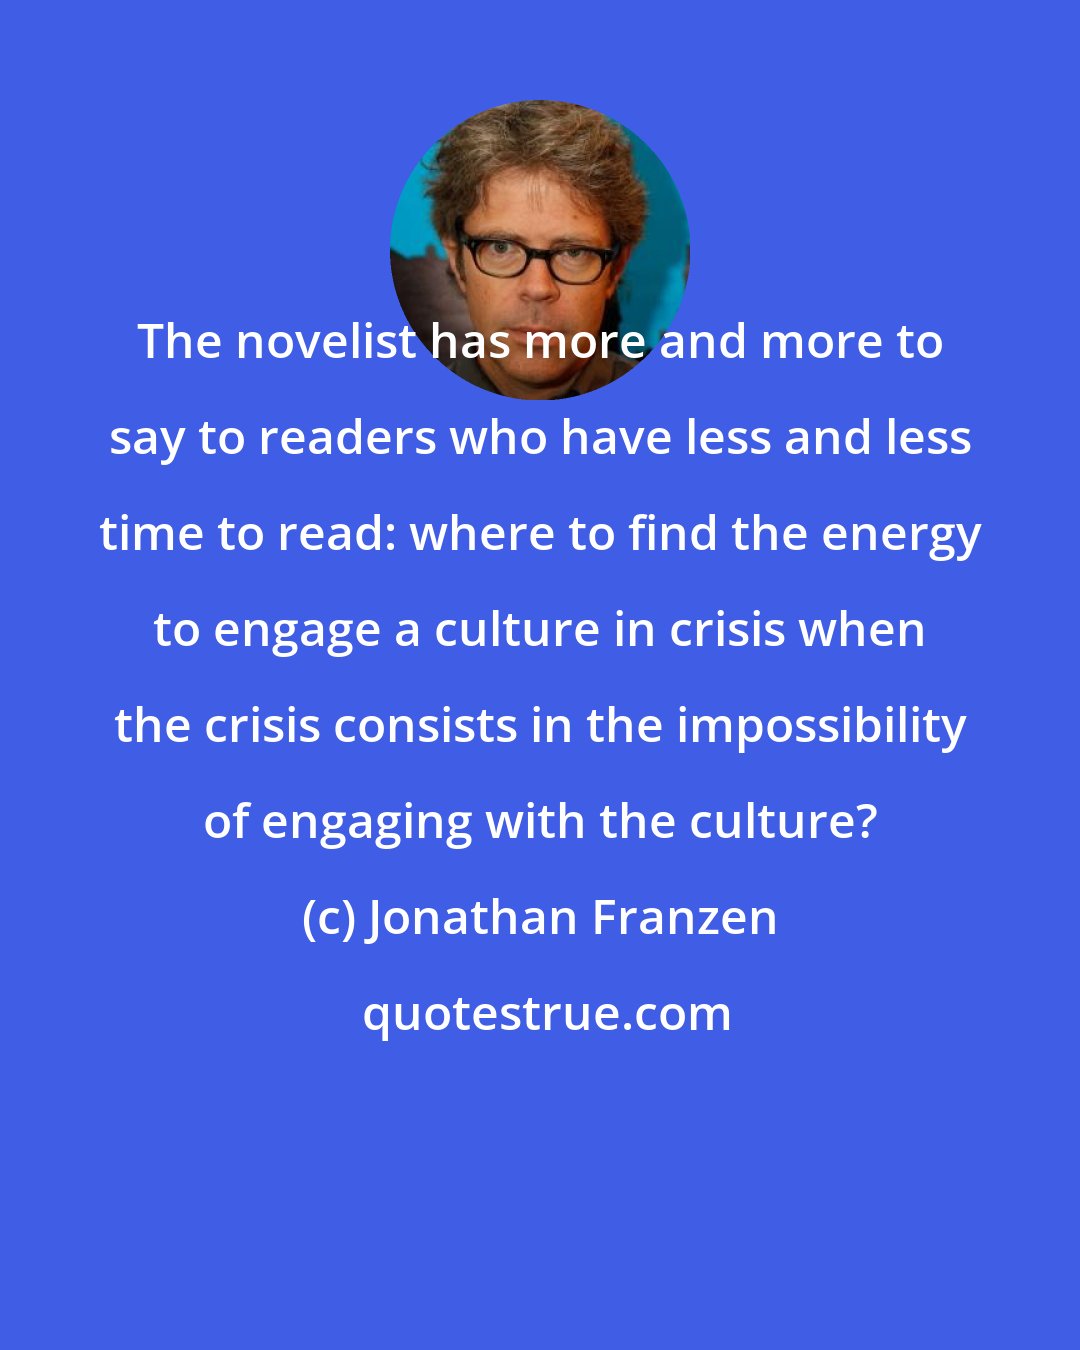 Jonathan Franzen: The novelist has more and more to say to readers who have less and less time to read: where to find the energy to engage a culture in crisis when the crisis consists in the impossibility of engaging with the culture?